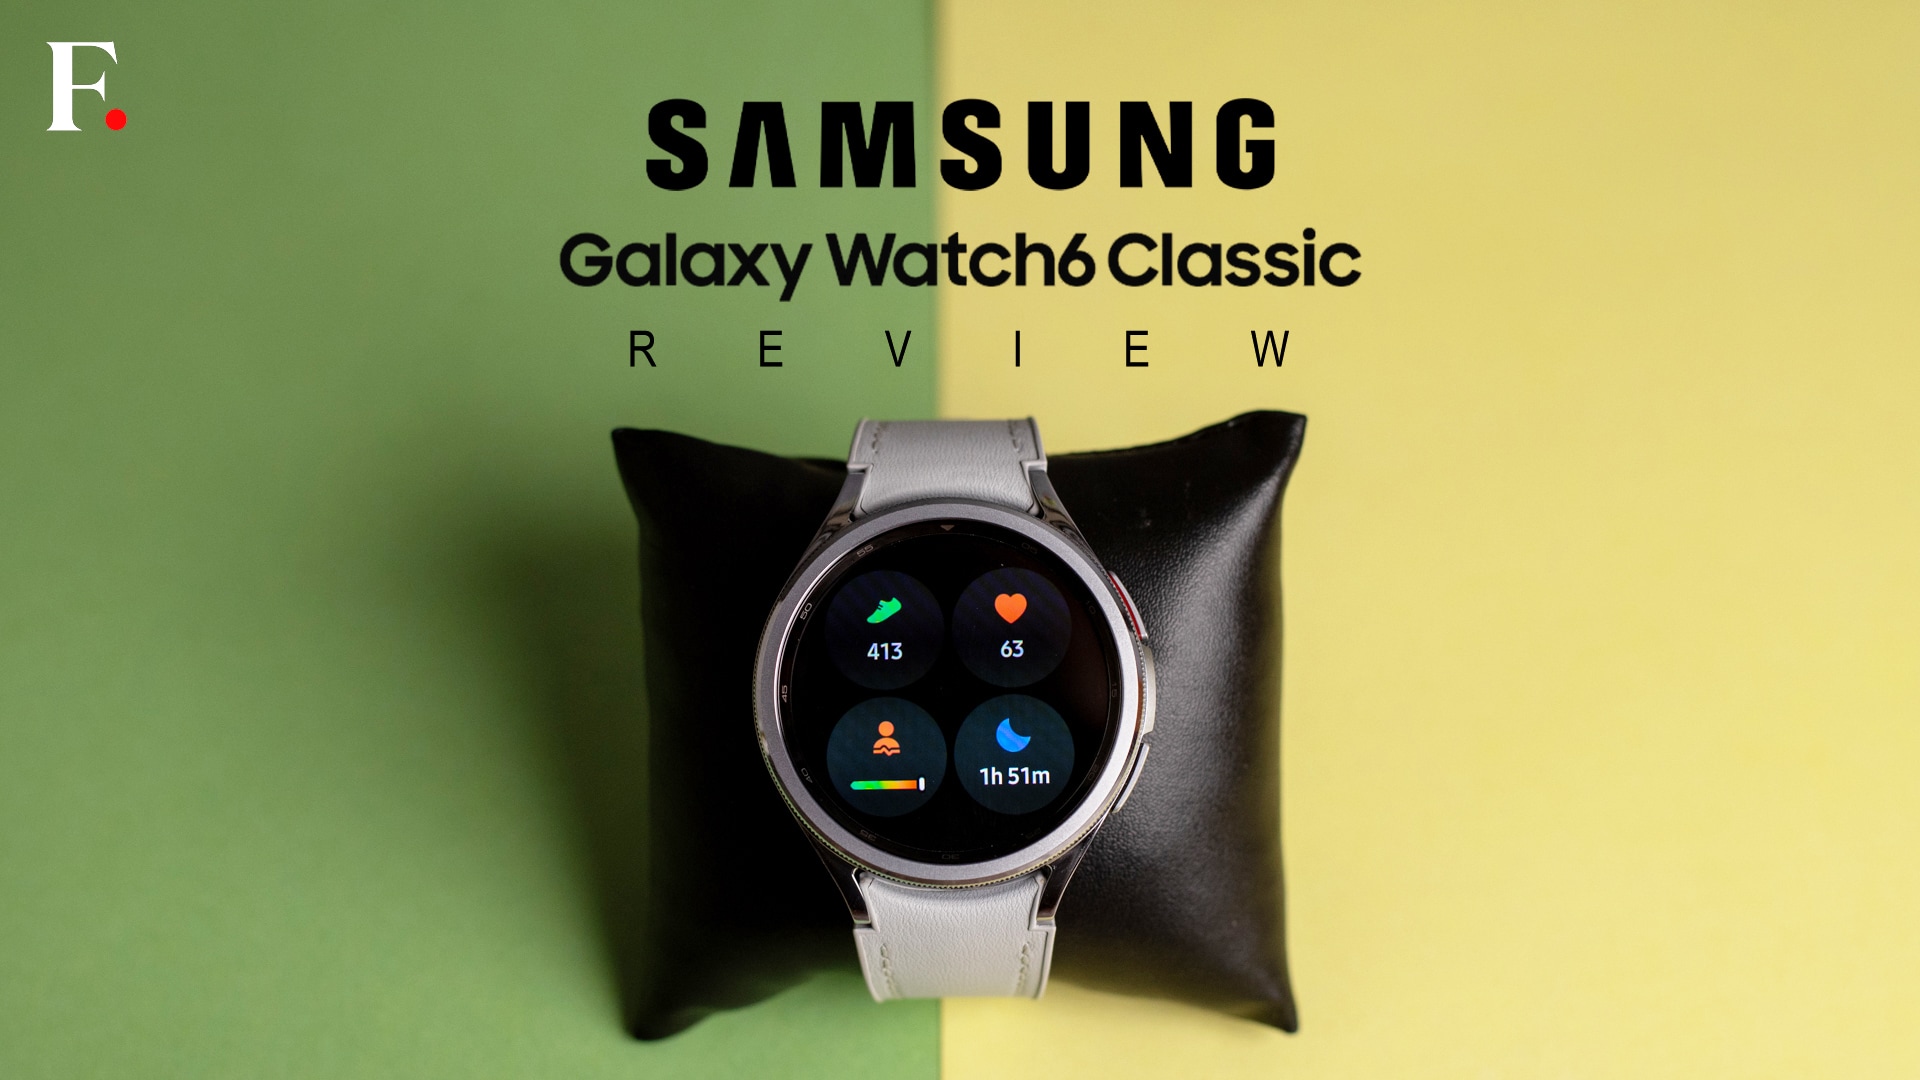 Samsung Galaxy Watch 6 Classic Review: The best smartwatch that Android users can get?